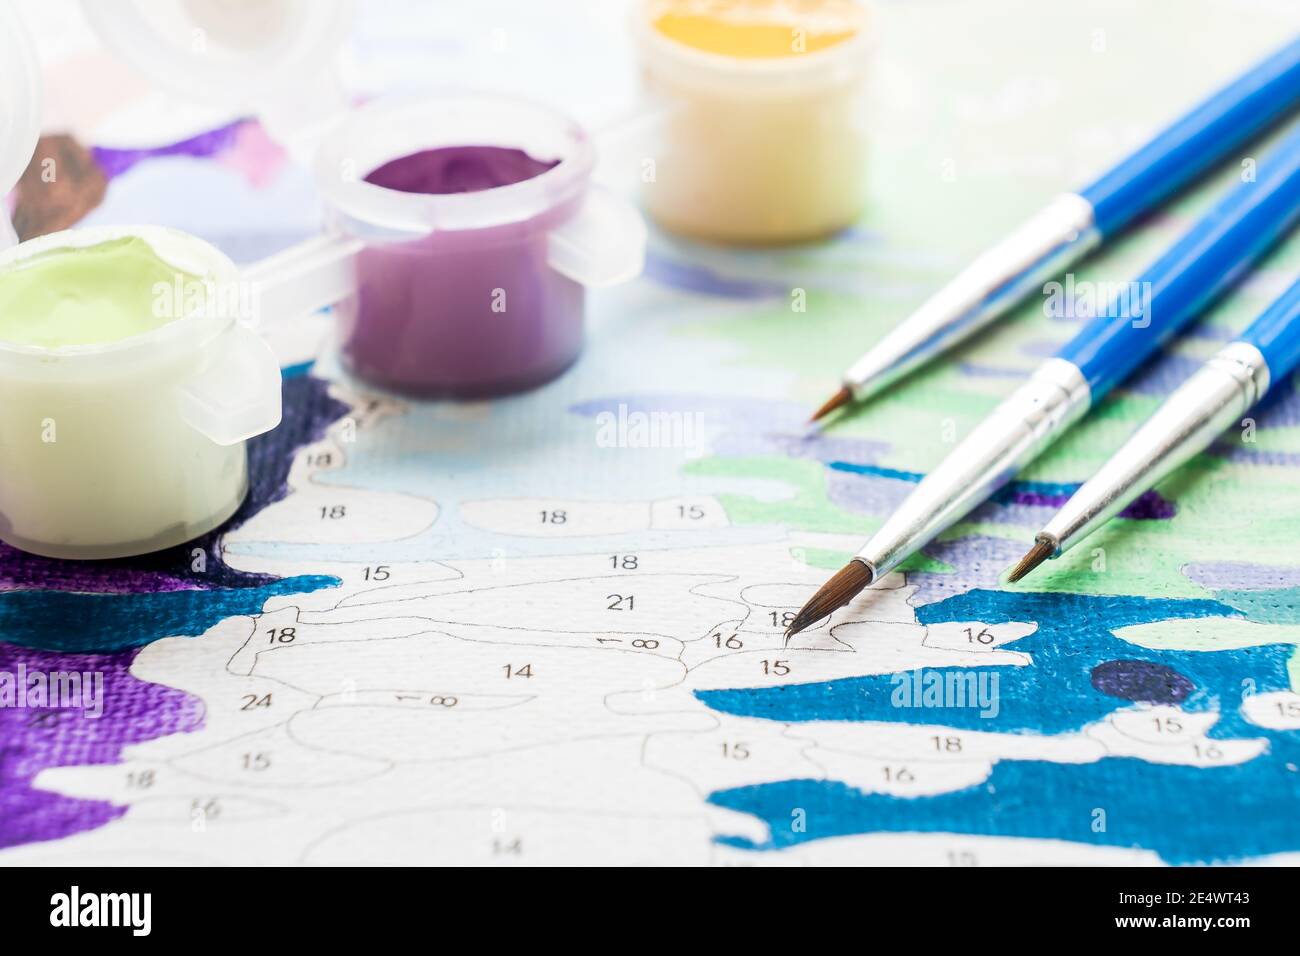 https://c8.alamy.com/comp/2E4WT43/the-artists-brush-and-multi-colored-paint-for-painting-on-the-coloring-by-numbers-top-view-of-the-table-2E4WT43.jpg